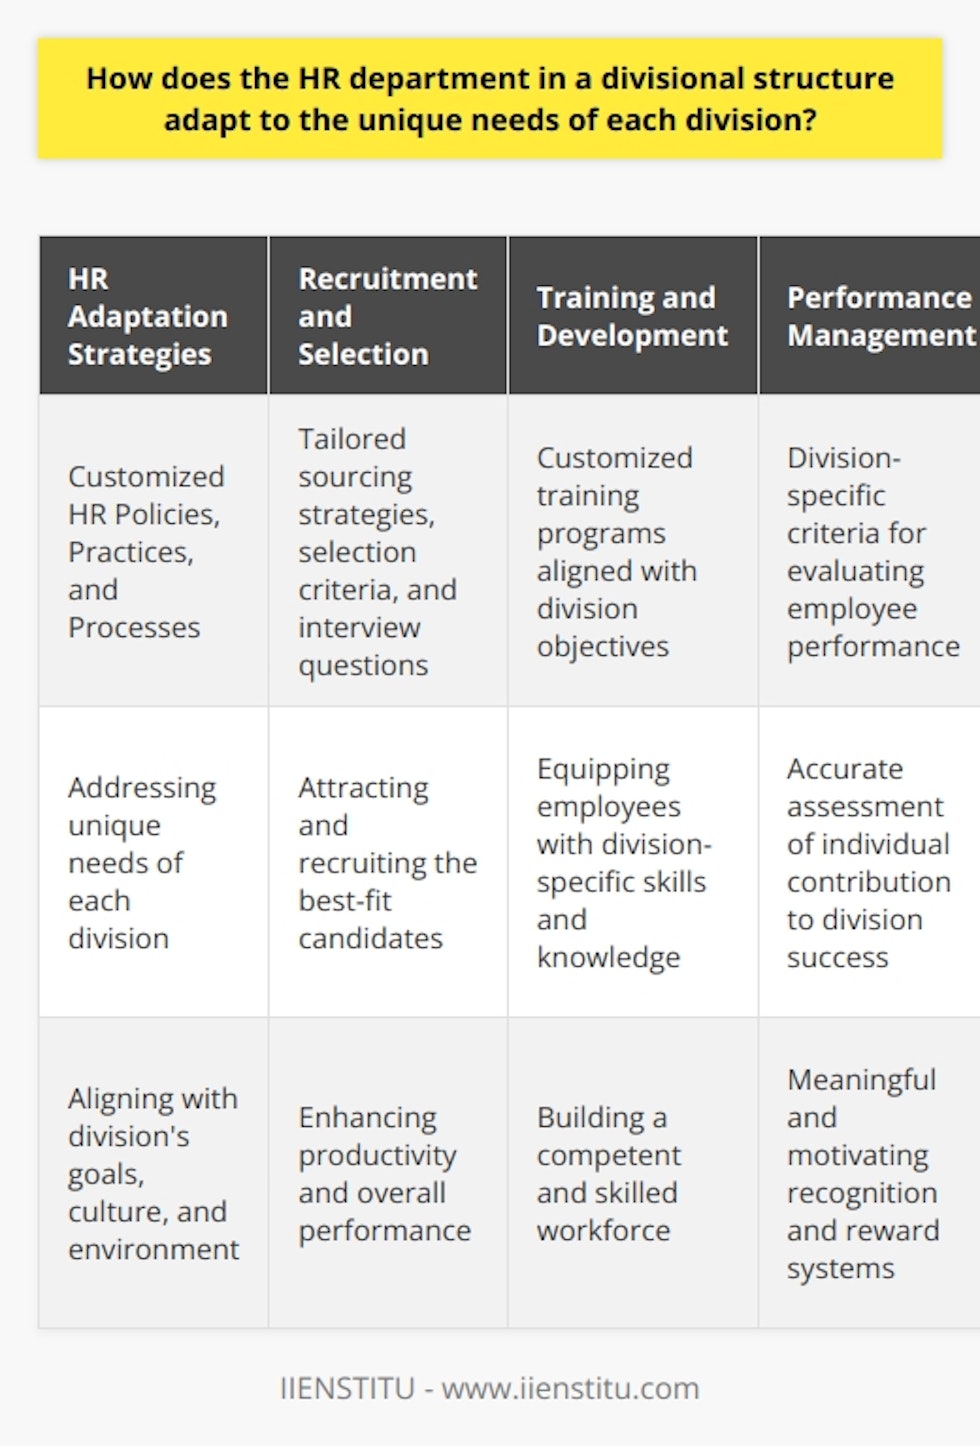 The HR department in a divisional structure plays a crucial role in addressing the unique needs of each division. To adapt to these needs, the HR department customizes HR policies, practices, and processes to align with each division's goals, culture, and environment. By doing so, the HR team is able to provide targeted support and services that cater to the specific challenges faced by each division.In the recruitment and selection process, the HR department takes into consideration the specific skills, competencies, and expertise required by each division. This involves tailoring sourcing strategies, selection criteria, and interview questions to suit the unique requirements of the division. By attracting and recruiting candidates who are the best fit for the division, productivity is increased, and overall performance is enhanced.Training and development programs are also customized to meet the unique requirements of each division. These programs are designed to equip employees with the skills and knowledge that align with the specific objectives and challenges of their division. By offering customized training and development opportunities, the HR department helps divisions build a competent and skilled workforce that can effectively accomplish their goals.Performance management systems are another area where the HR department adapts to divisional needs. By designing and implementing division-specific criteria for evaluating employee performance, the HR department ensures an accurate assessment of each individual's contribution to the division's success. This makes recognition and reward systems more meaningful and motivating for employees, ultimately promoting enhanced performance and productivity throughout the organization.Lastly, the HR department fosters divisional collaboration by creating a cohesive organizational culture that transcends divisional boundaries. Effective communication channels are initiated and sustained, which in turn nurtures cross-functional collaboration and knowledge sharing among employees. This fosters innovation, problem-solving, and improved decision-making, benefiting the entire organization.In summary, adapting HR practices to the unique needs of each division within a divisional structure is key to organizational success. Customized recruitment, targeted training and development, division-specific performance management, and fostering collaboration are strategies employed by the HR department to support and enhance the functioning of each division.